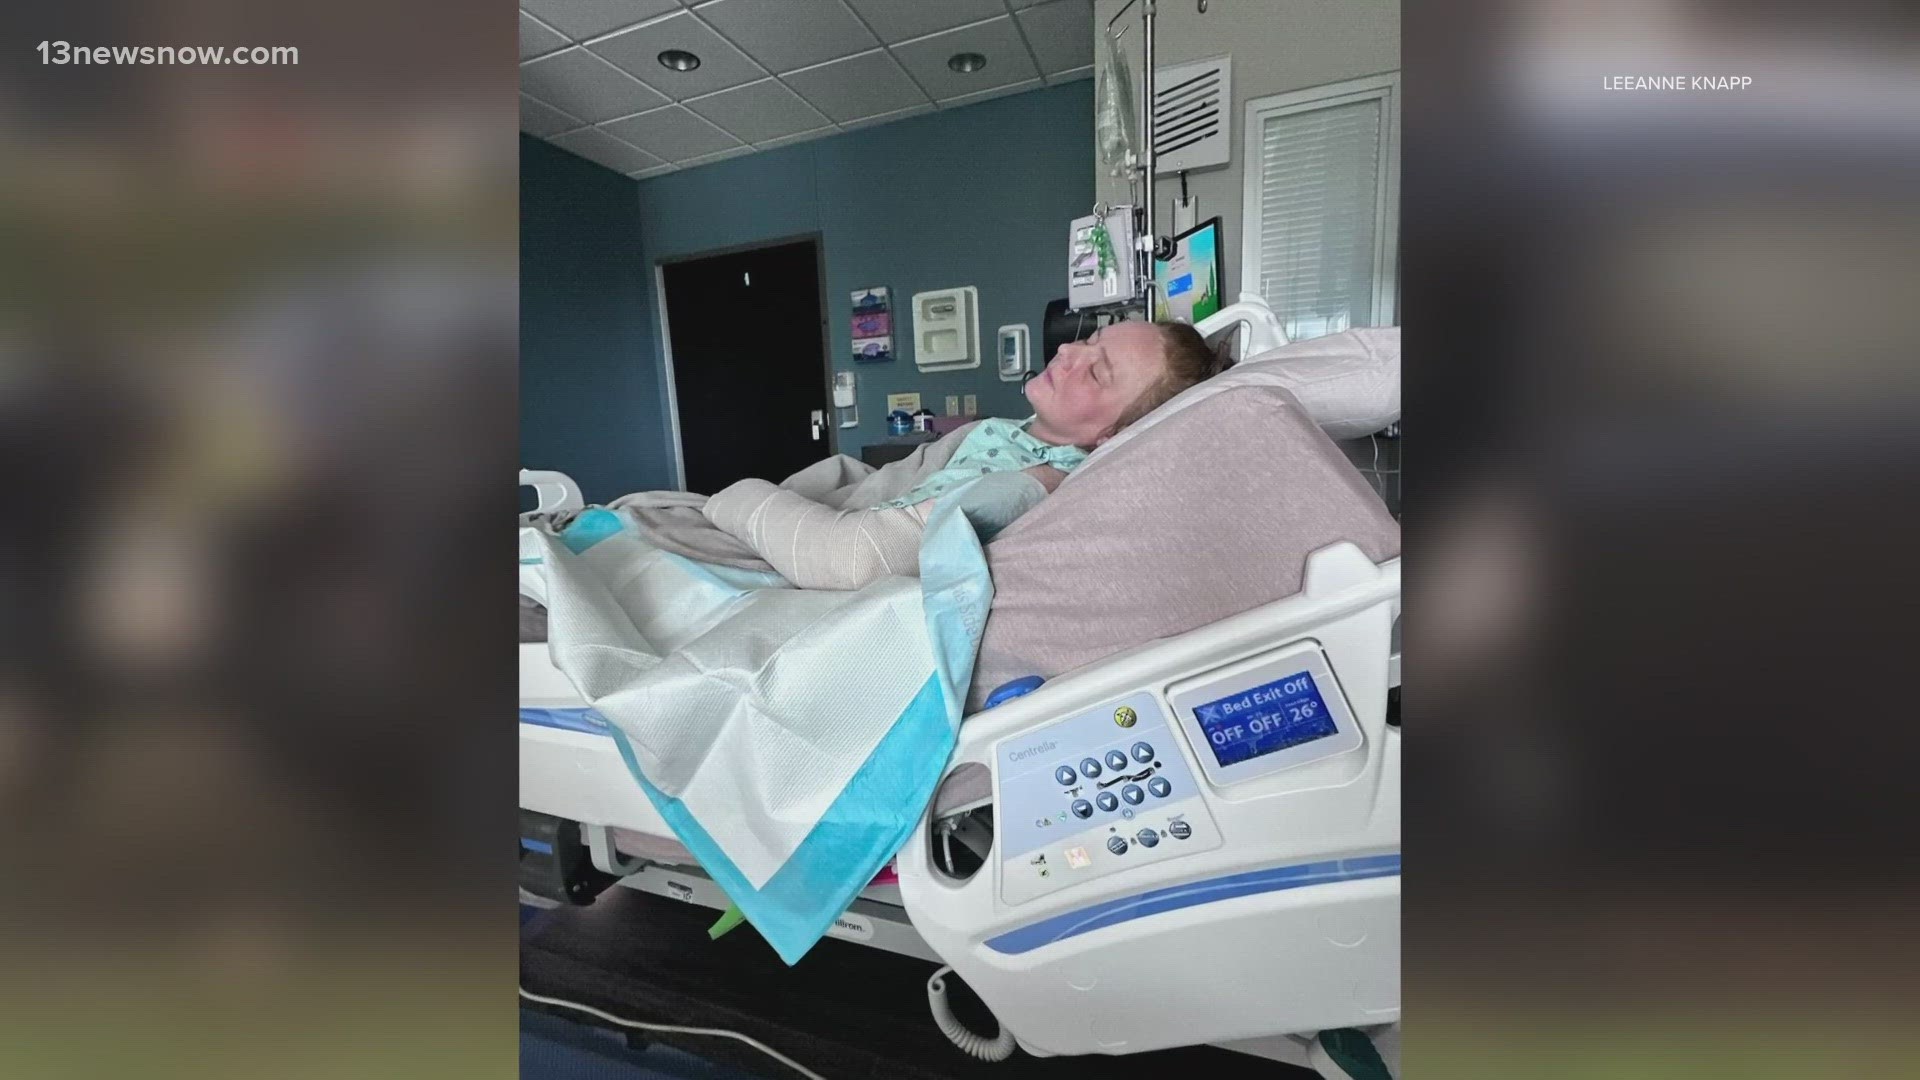 LeeAnne Knapp said her stepdaughter Jessica Garrison's life changed after her vehicle was struck during a police chase in the Deep Creek area.